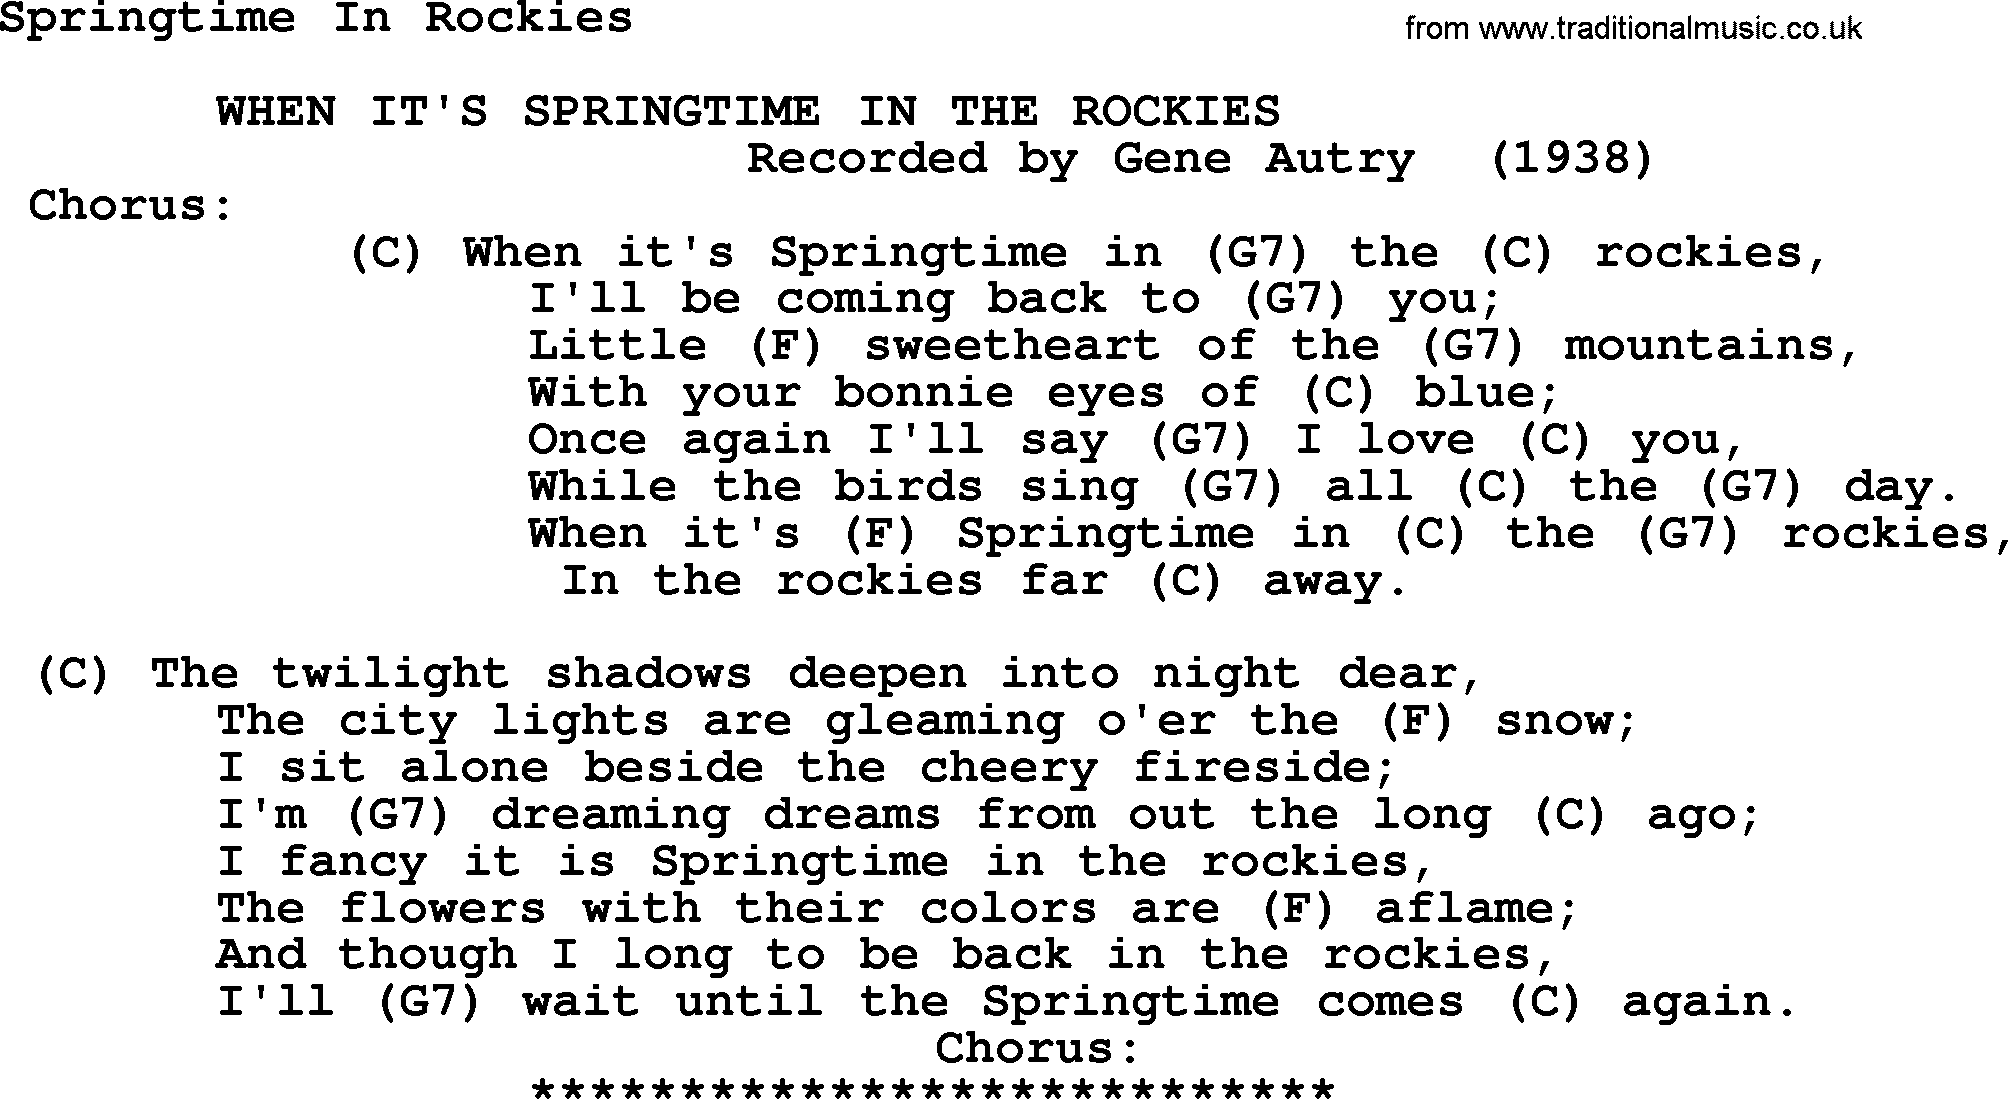 Bluegrass song: Springtime In Rockies, lyrics and chords